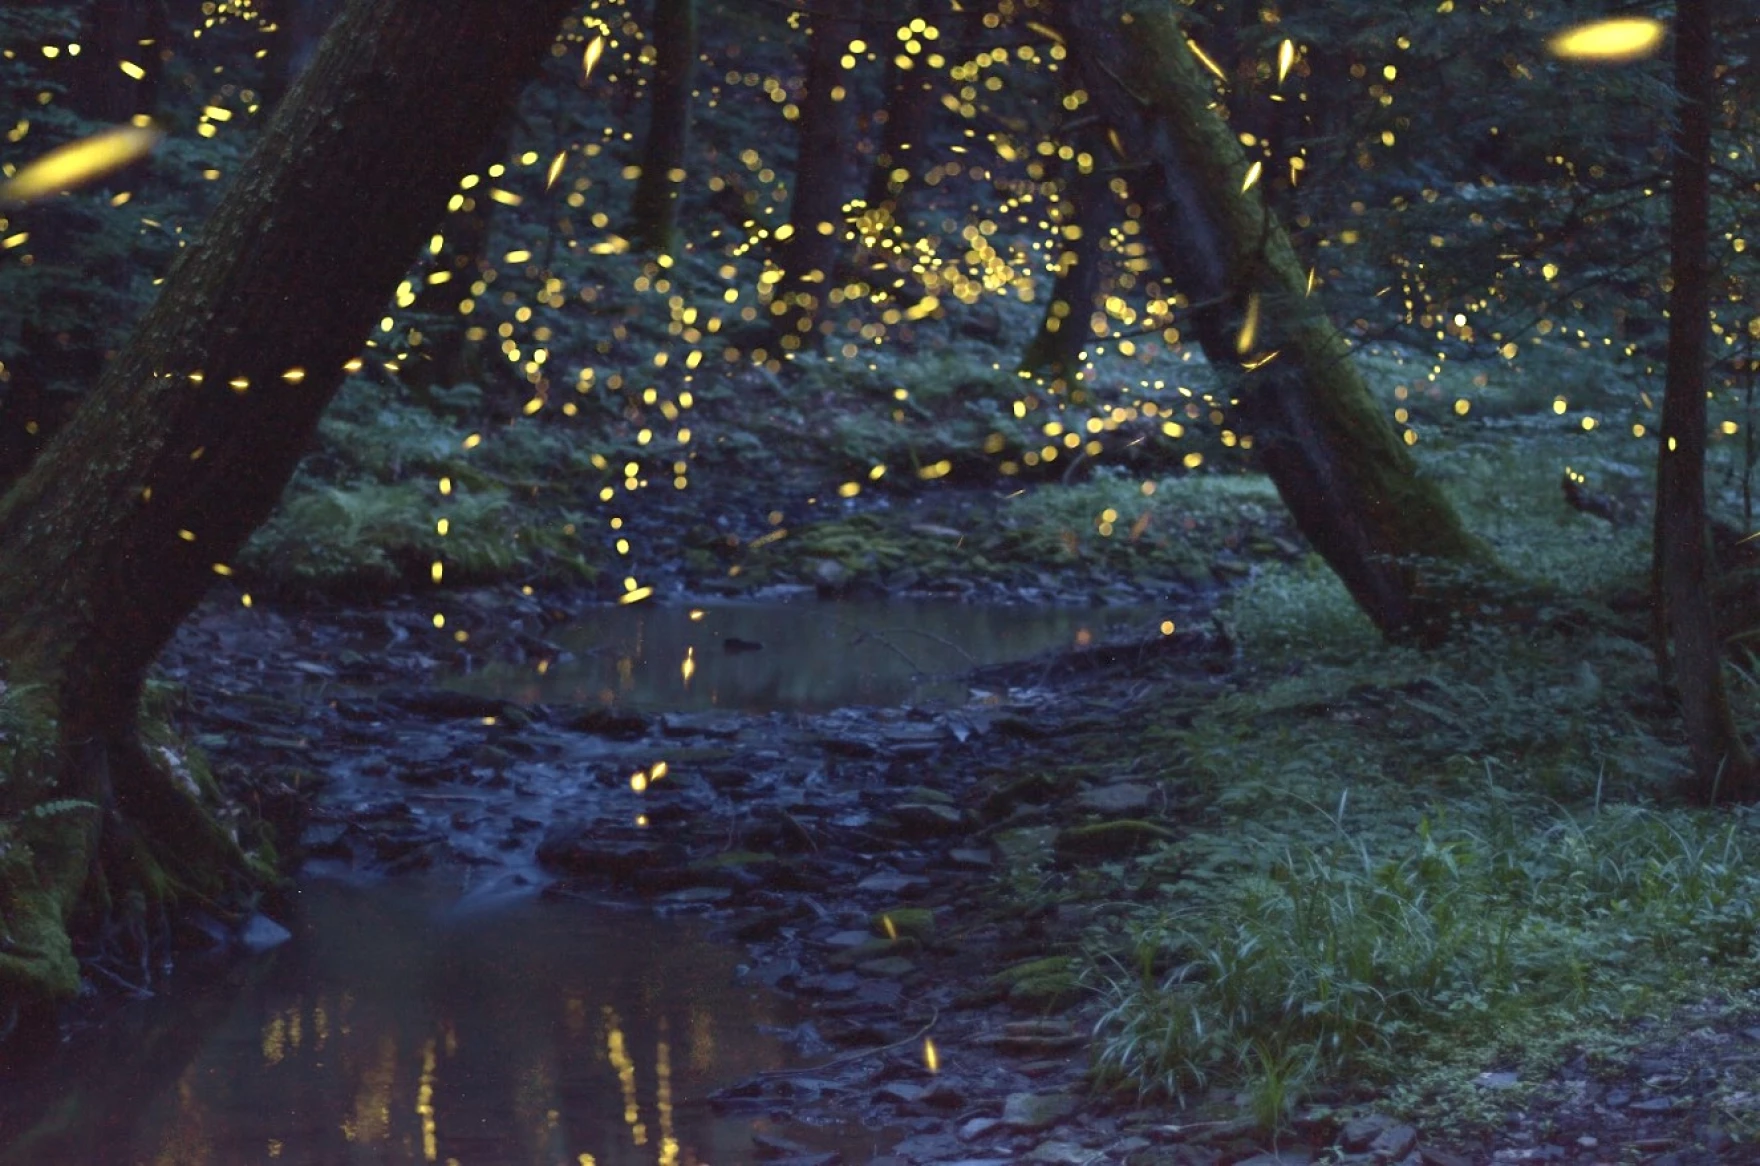 Hundreds of yellow lights hang in the air over a stream at dusk